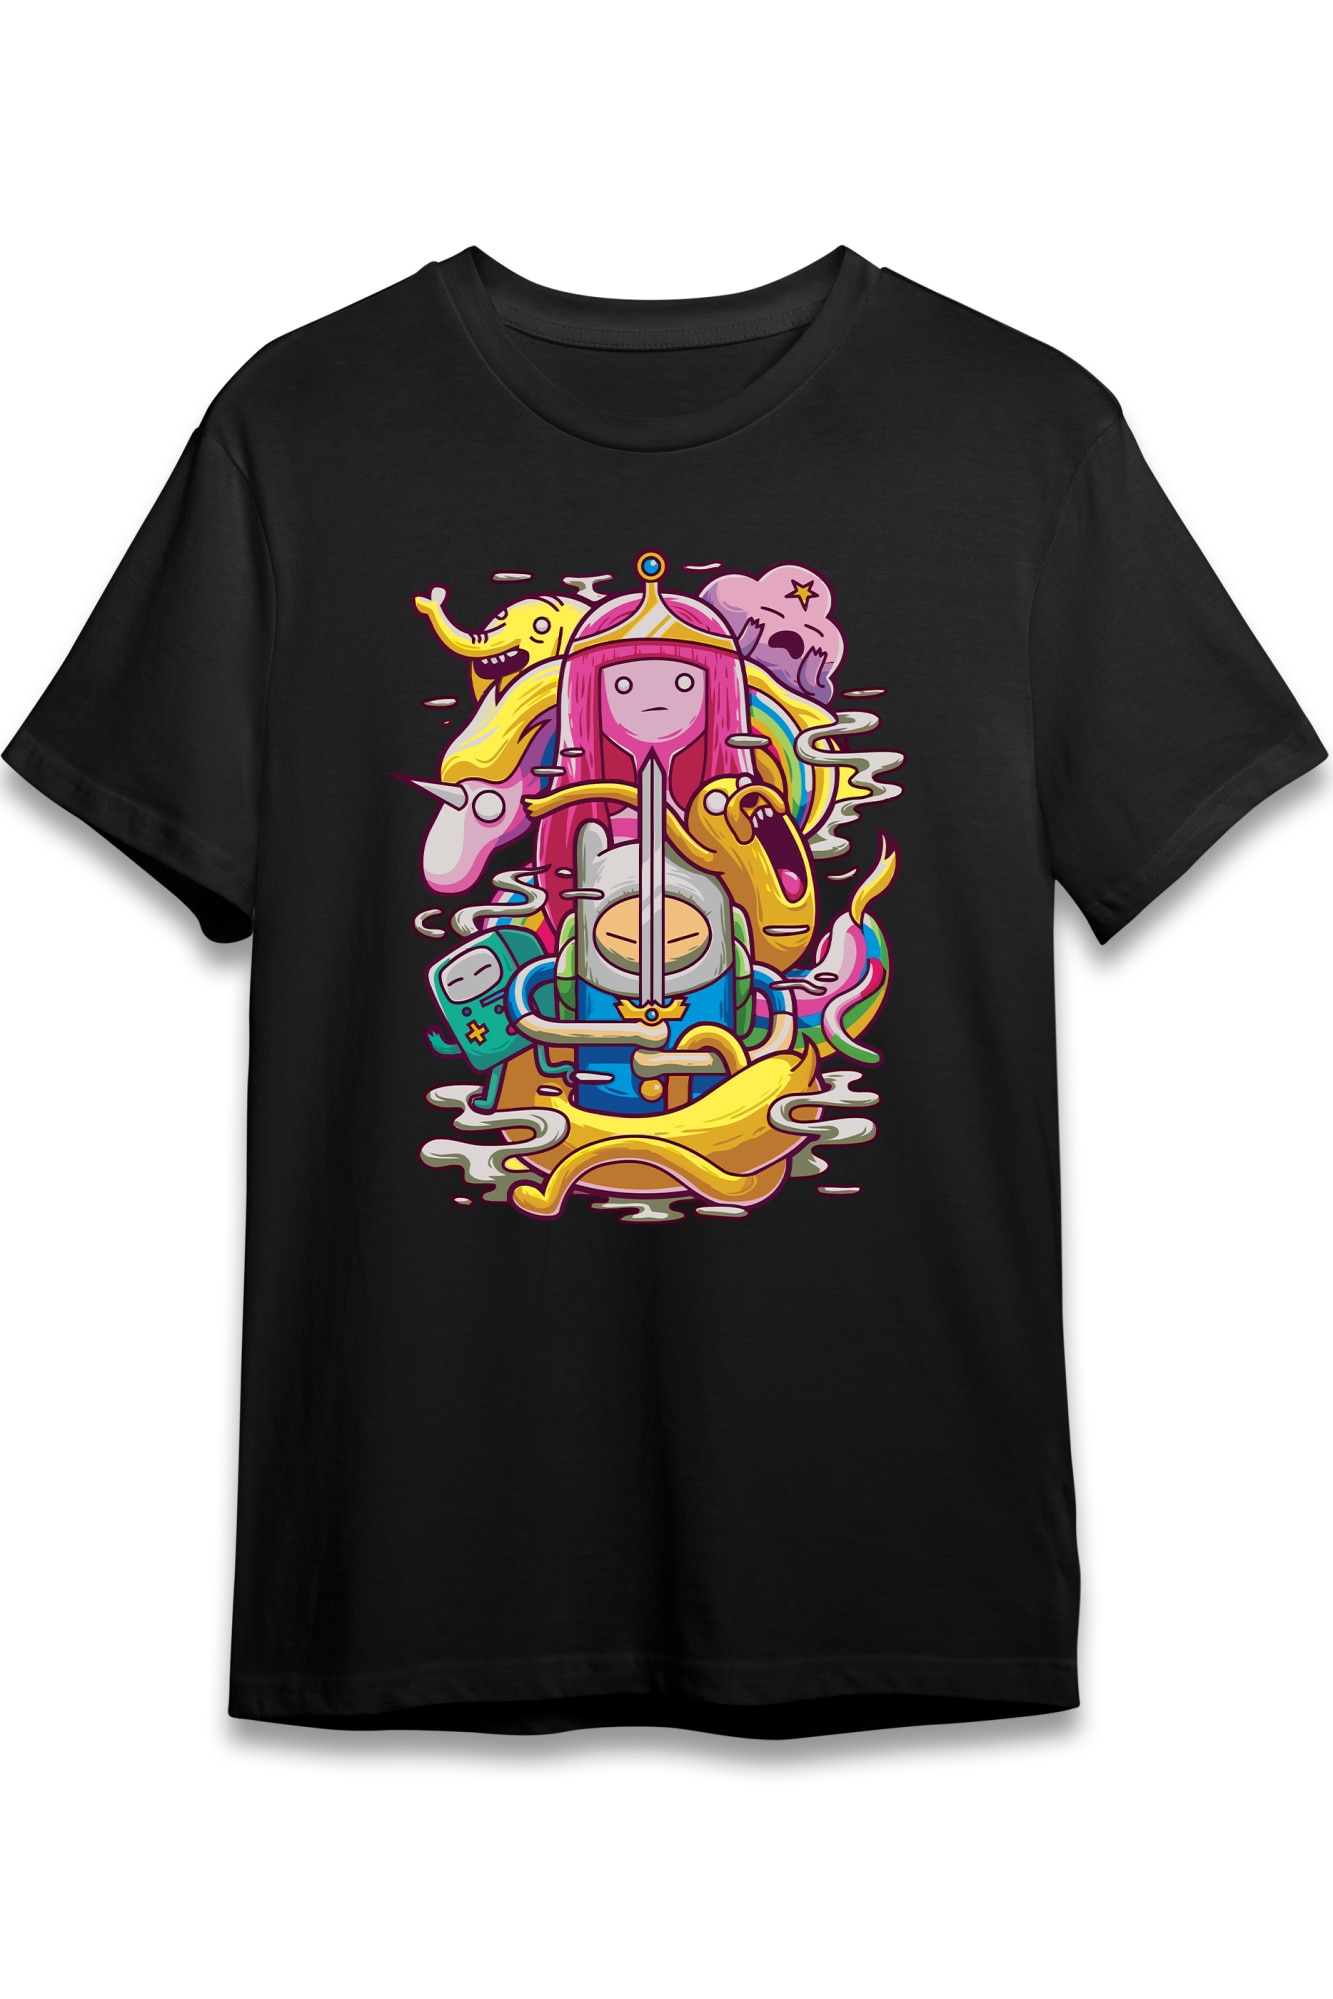 produce shy Thoroughly Tricou Adventure Time Psihedelic, Unisex, Negru, 100% Bumbac - eMAG.ro